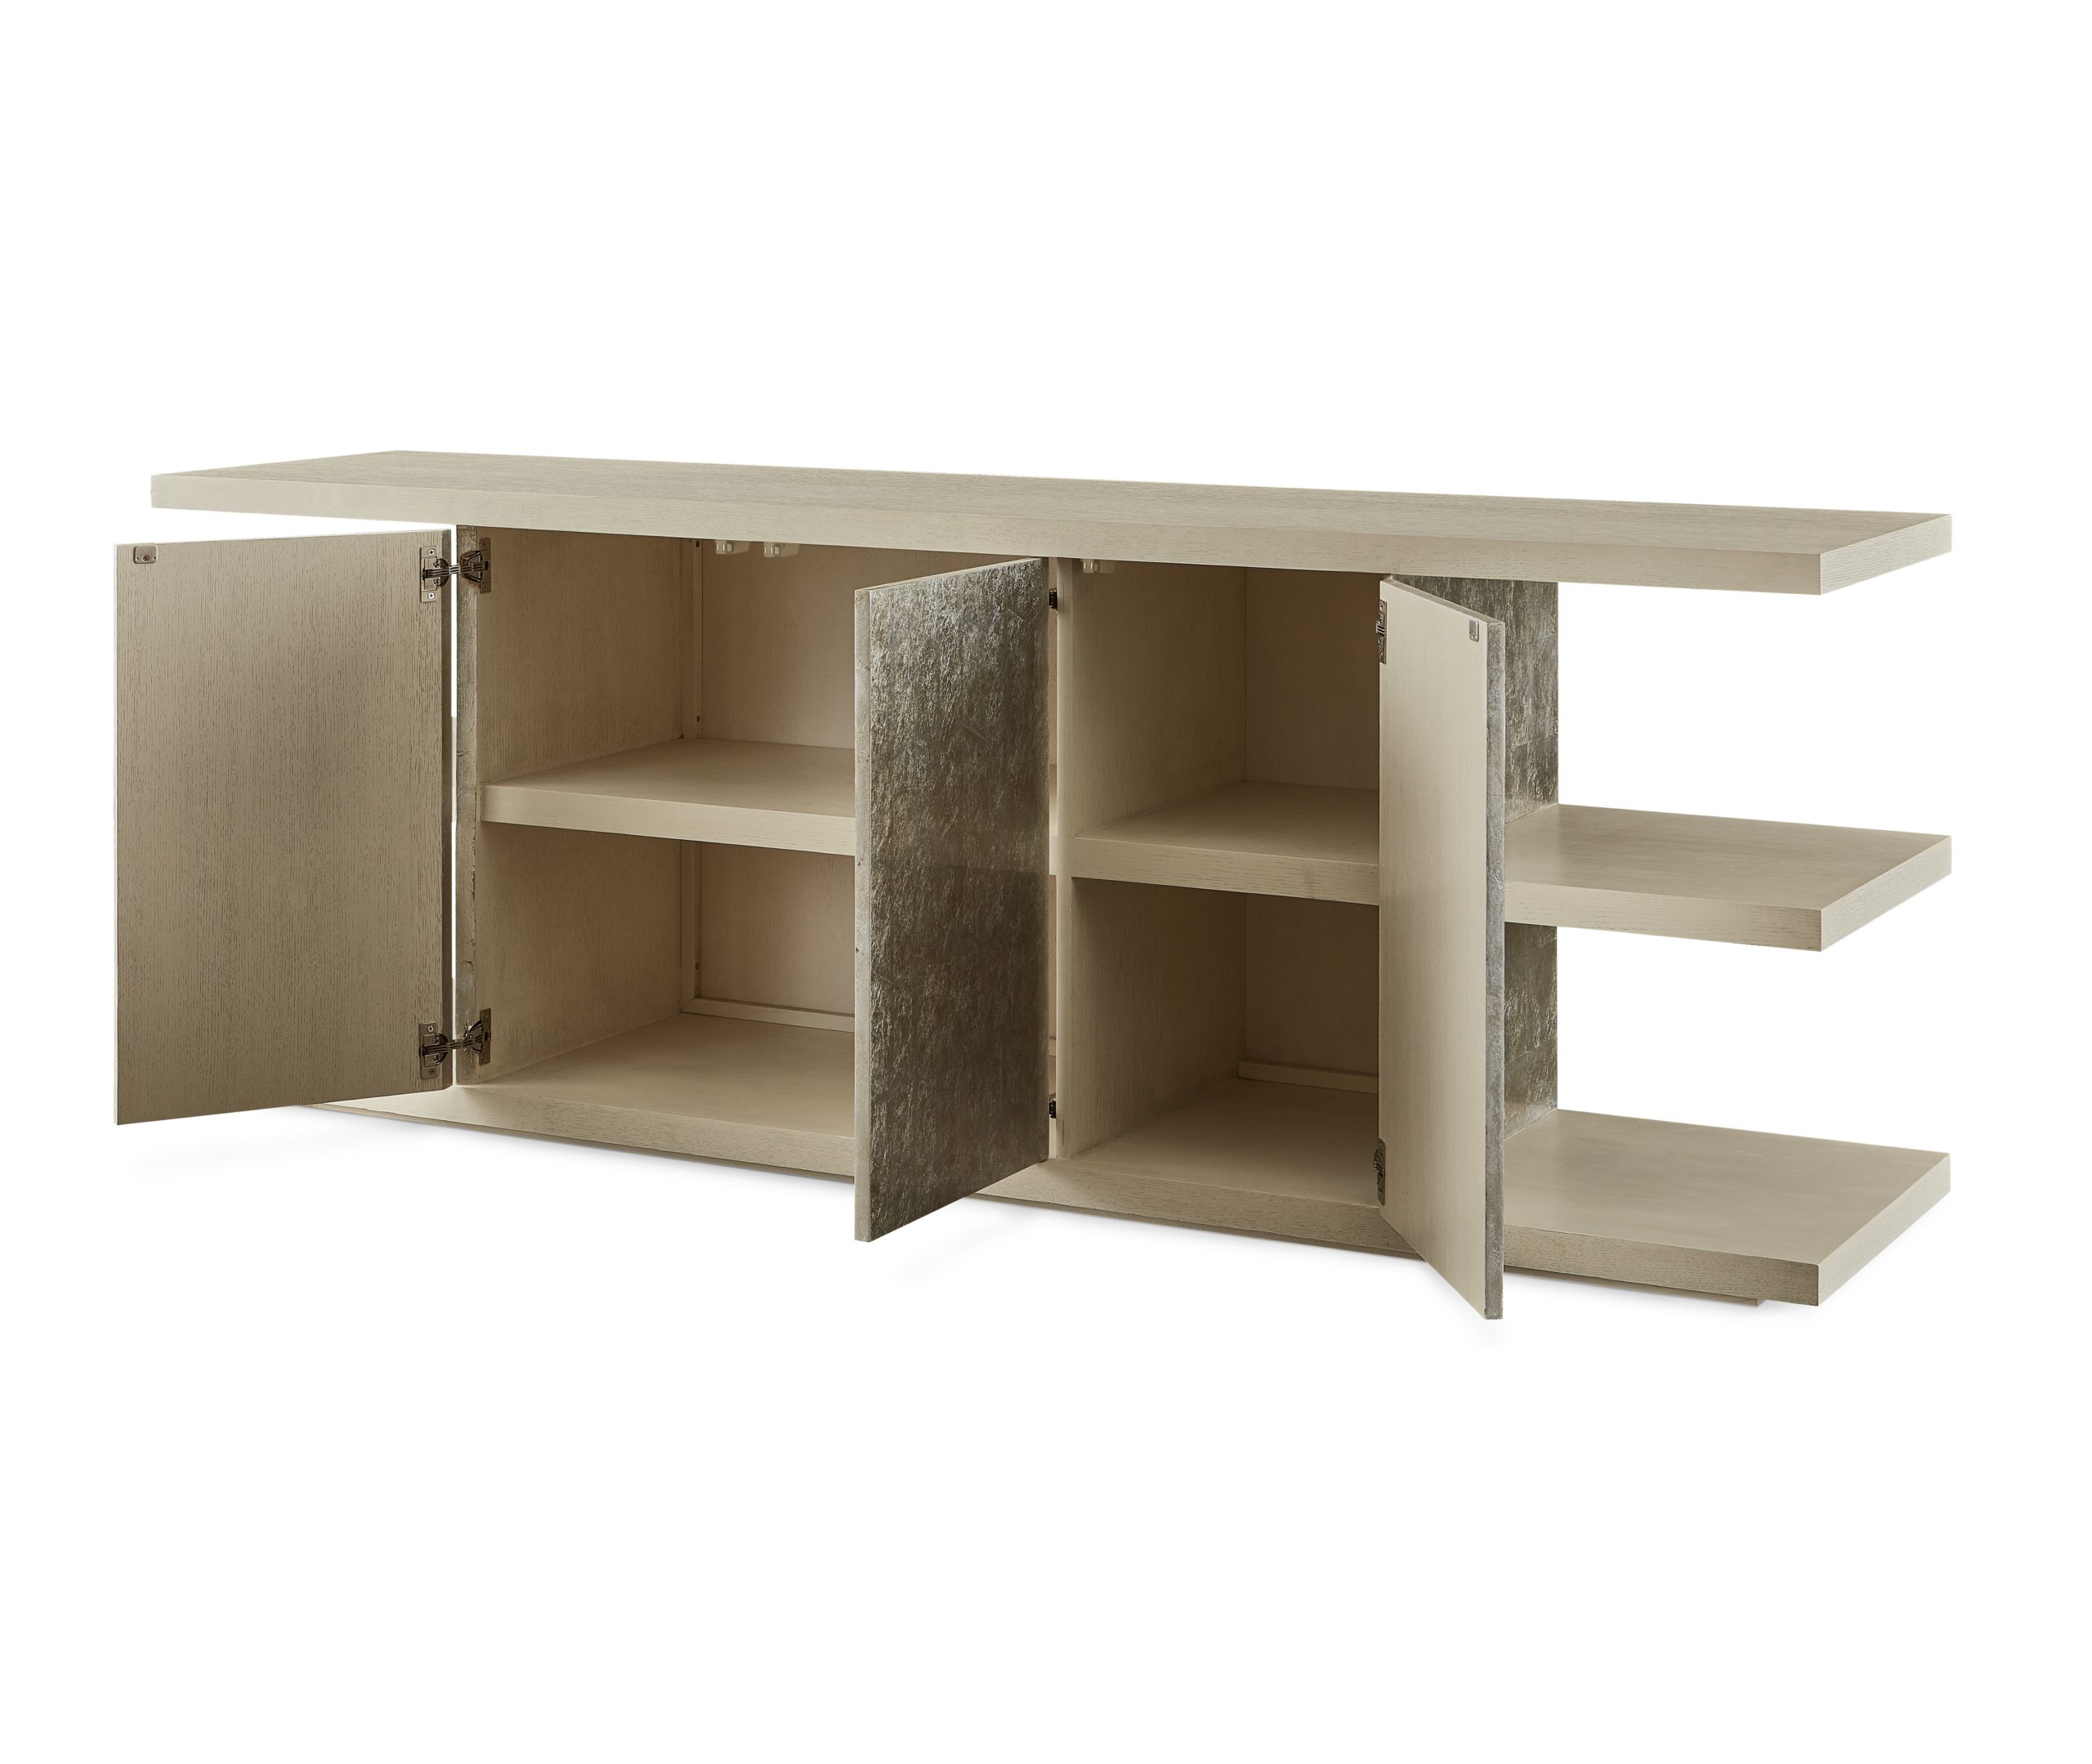 Baker_products_WNWN_hollis_media_console_BAA3064_OPEN-scaled-2